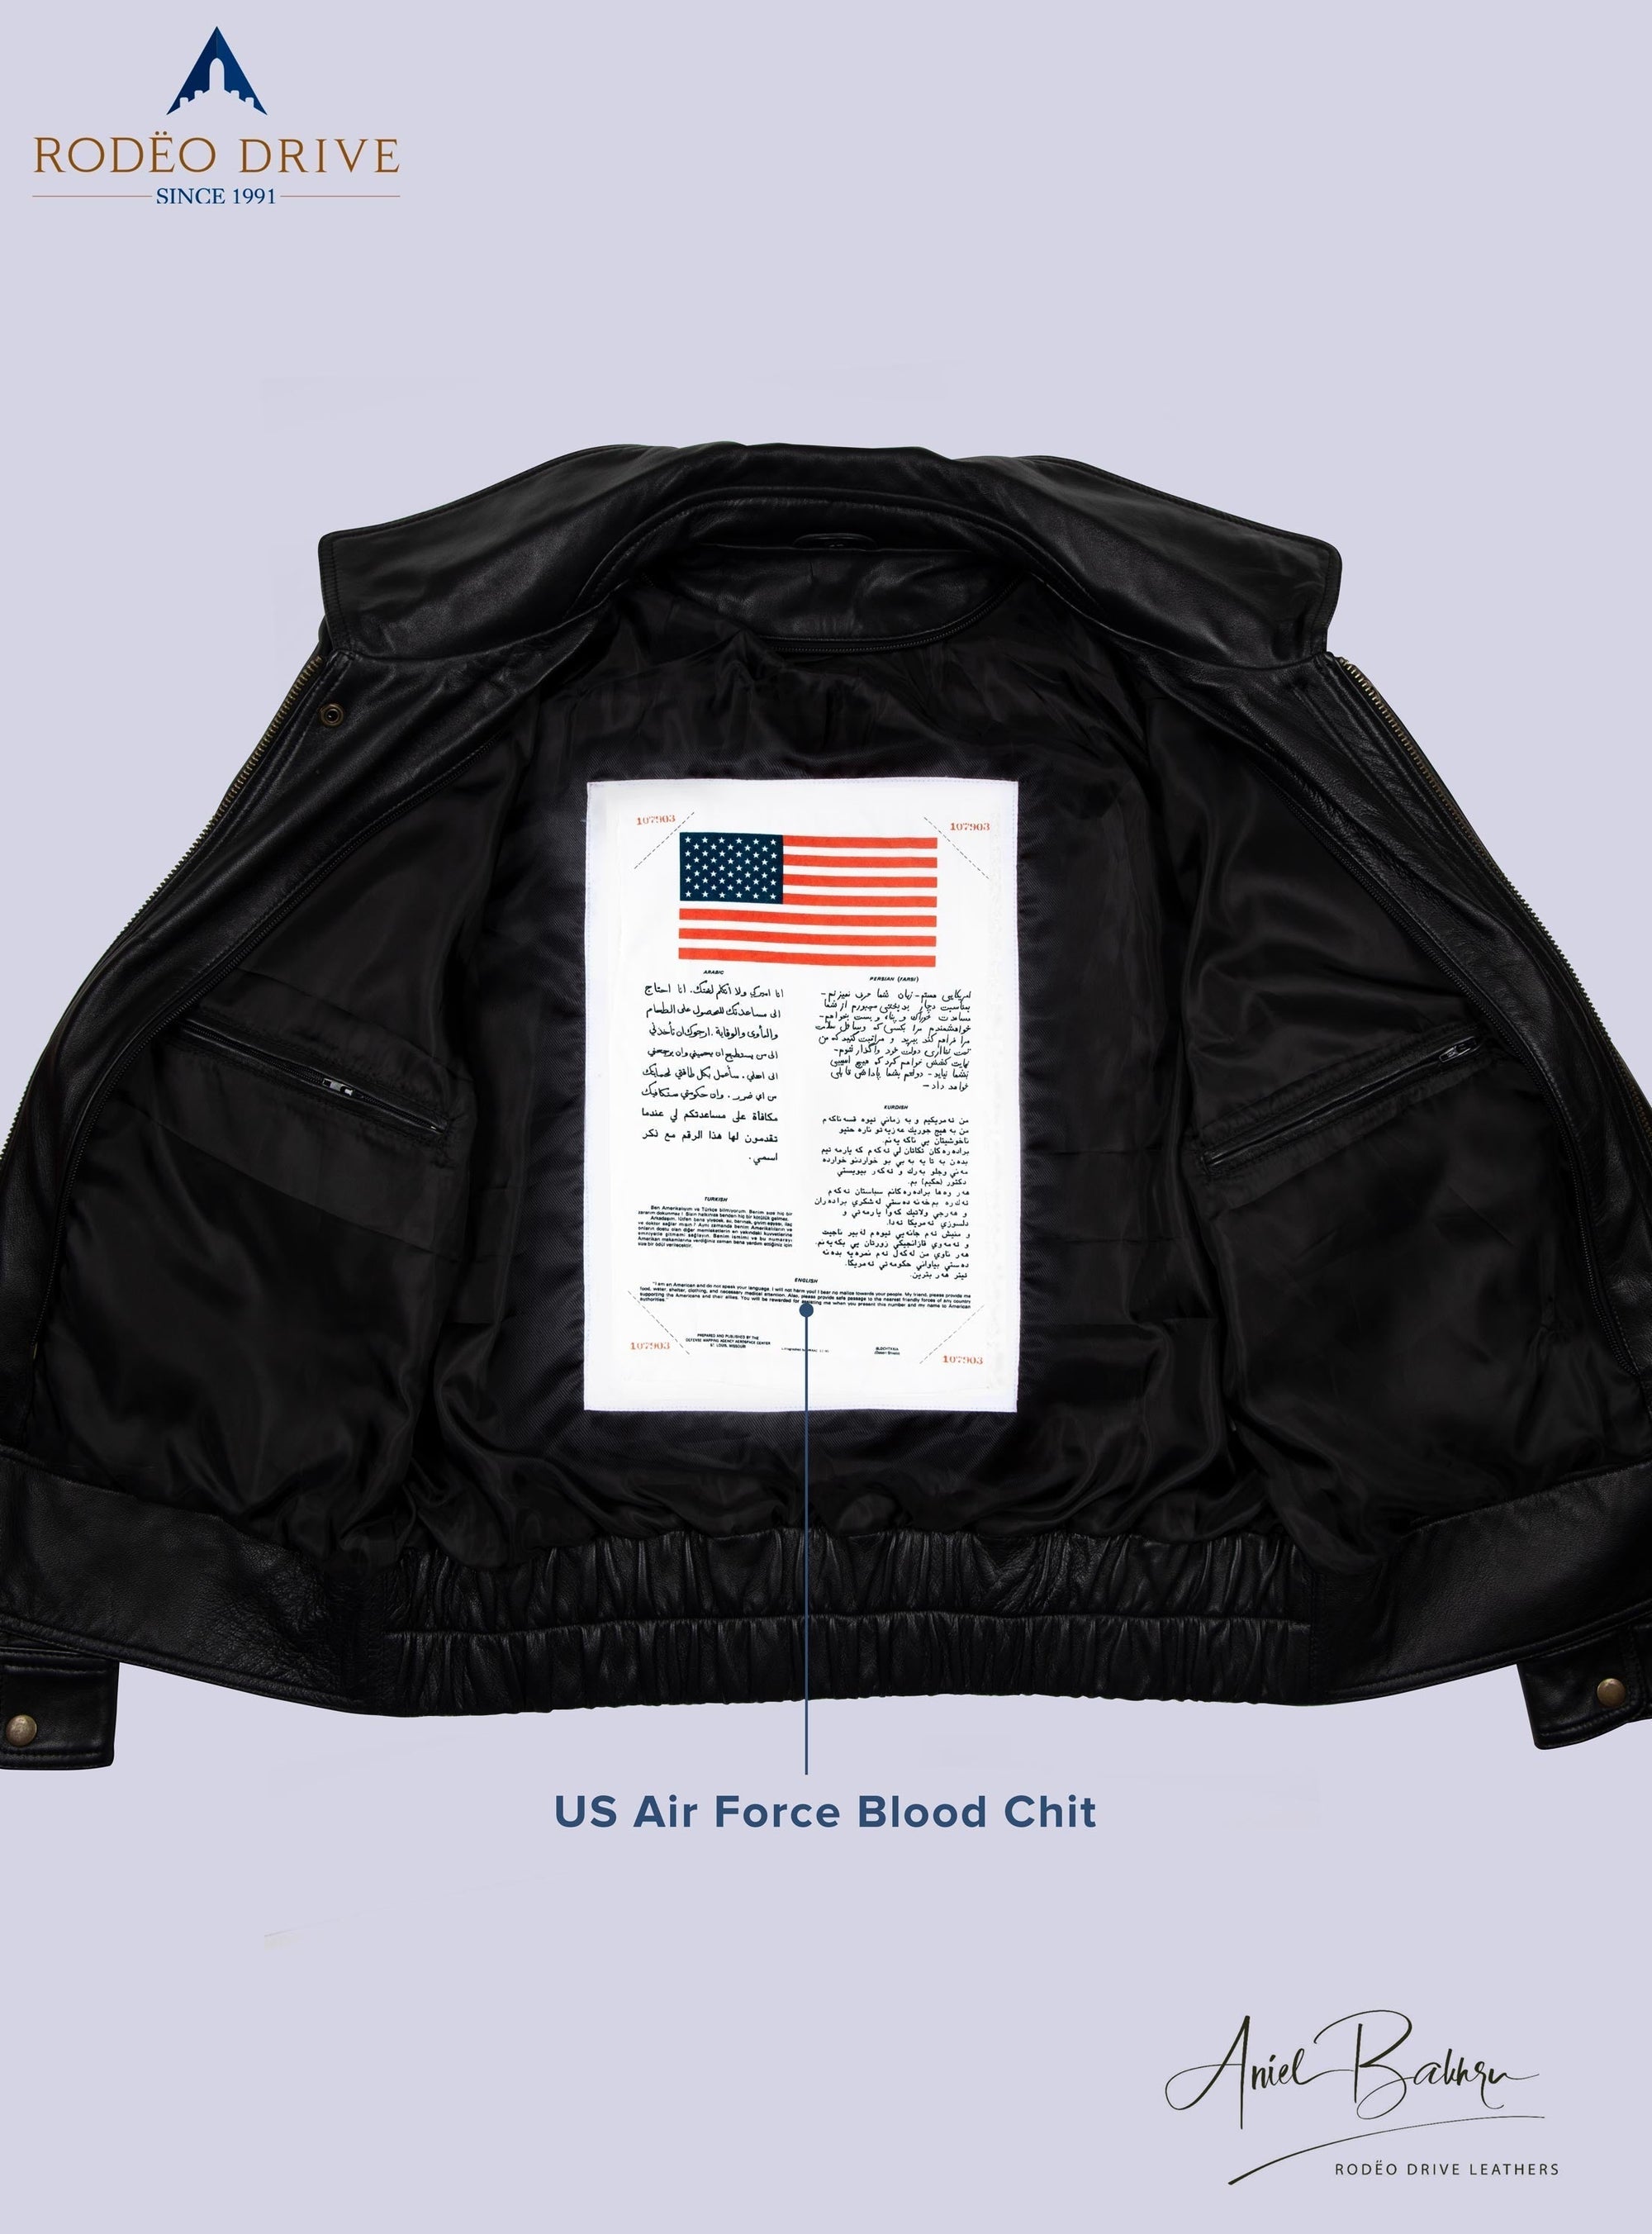 Inside image of CUSTOM UNIFORM LEATHER JACKETS MEN. USA air force Blood Chit  is sewed inside.